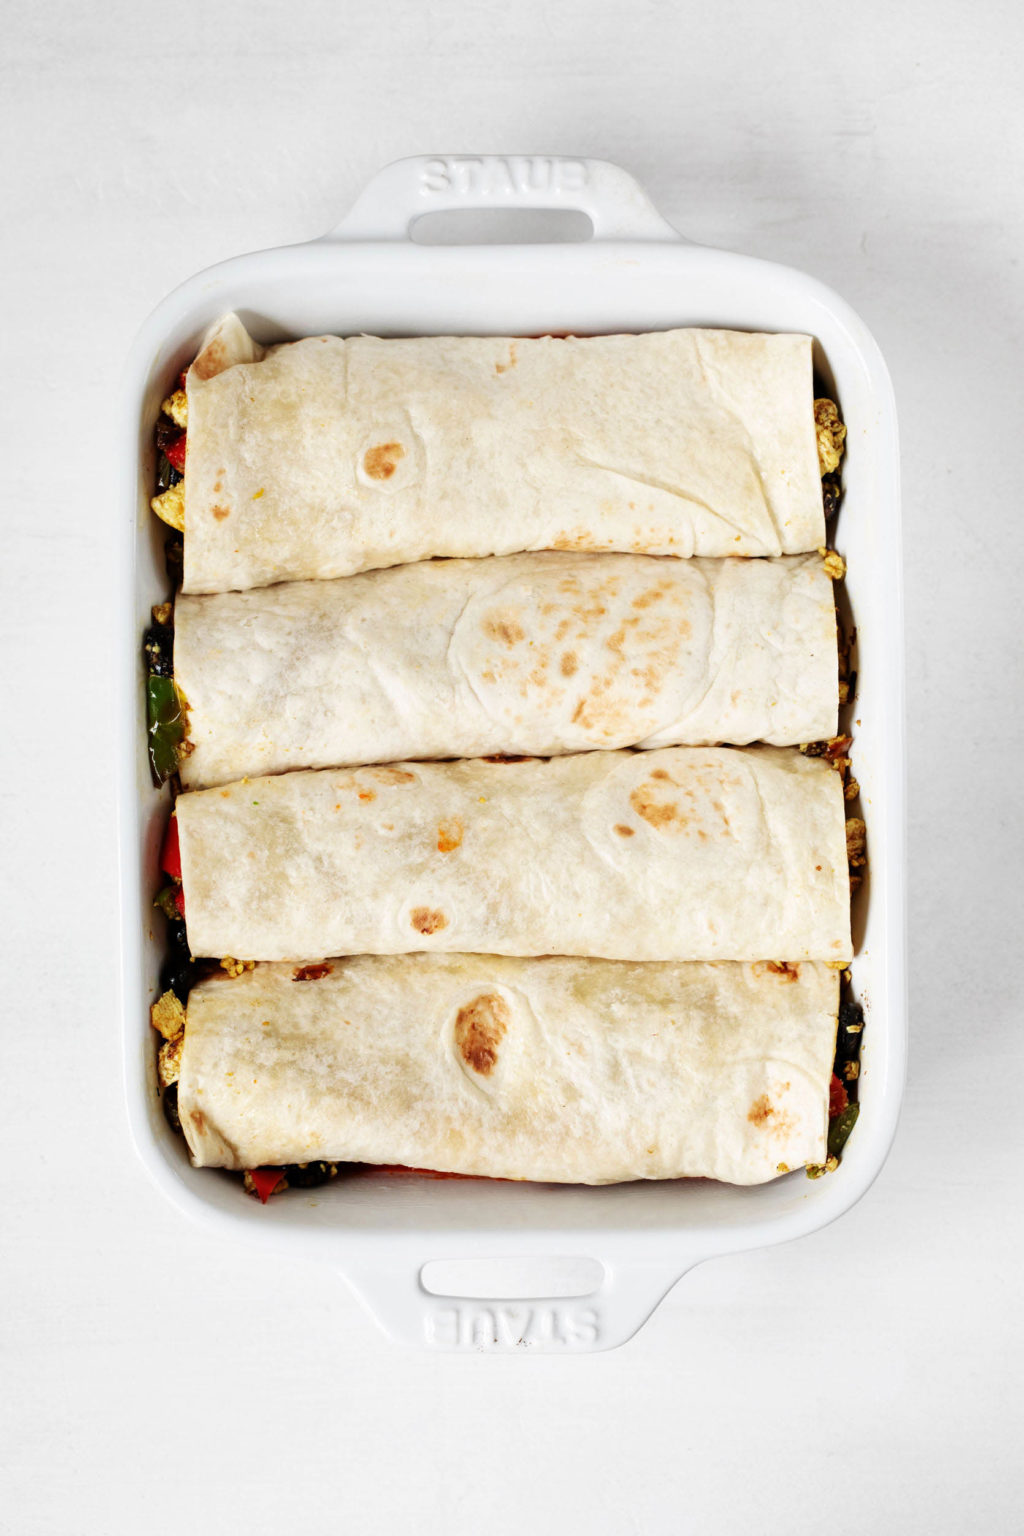 Vegan tortillas, stuffed with a filling, are layered in a white baking dish.